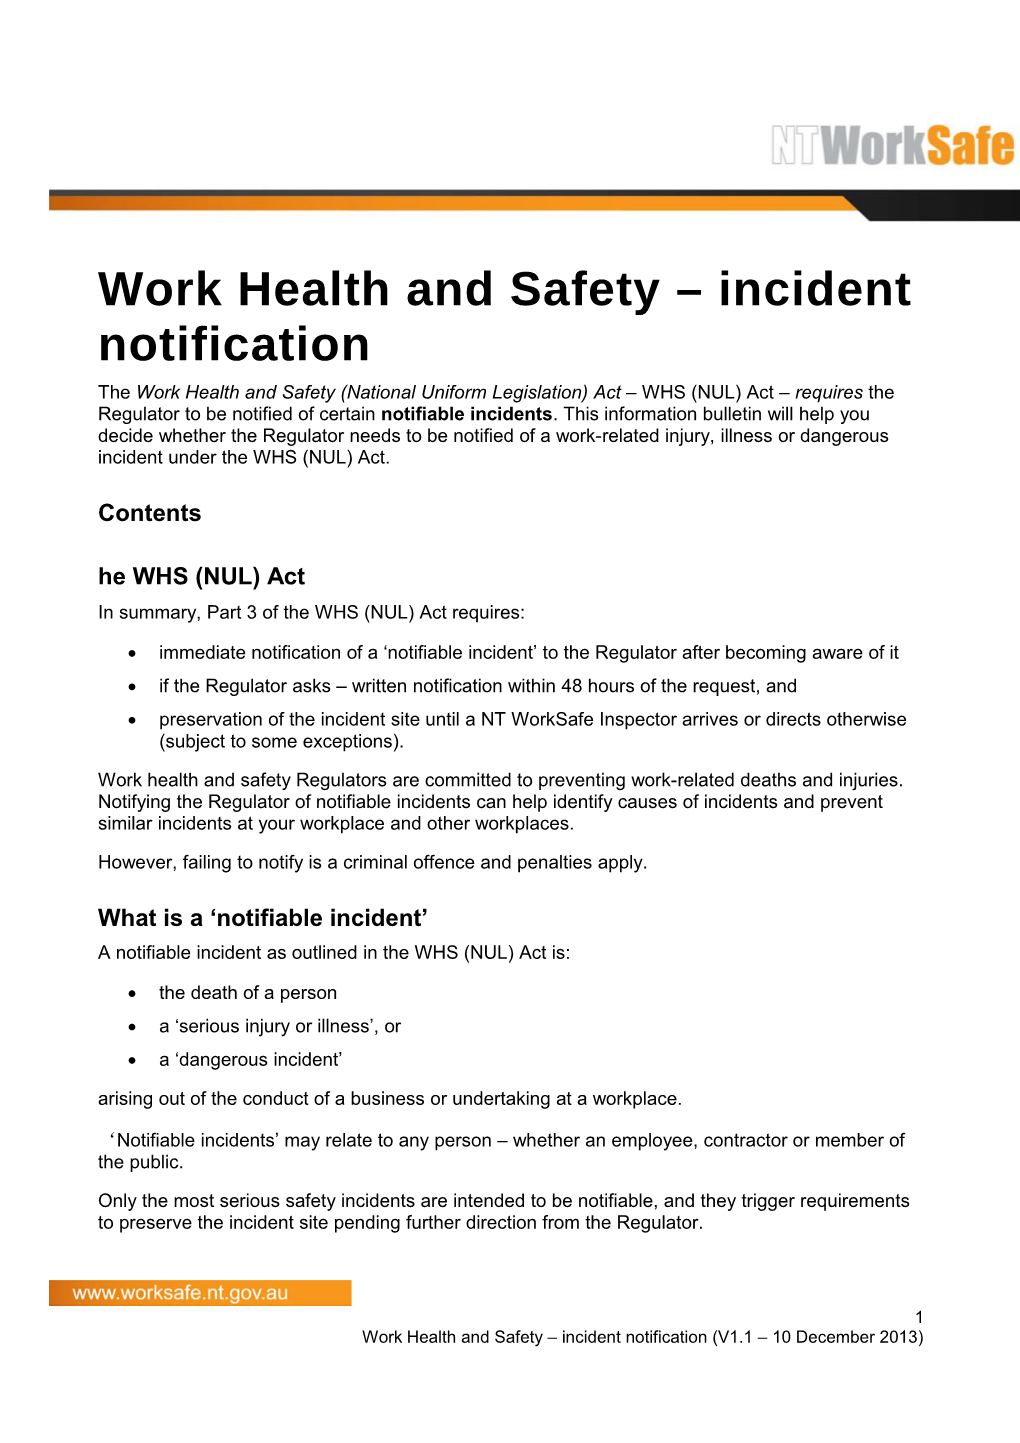 Work Health and Safety - Incident Notification